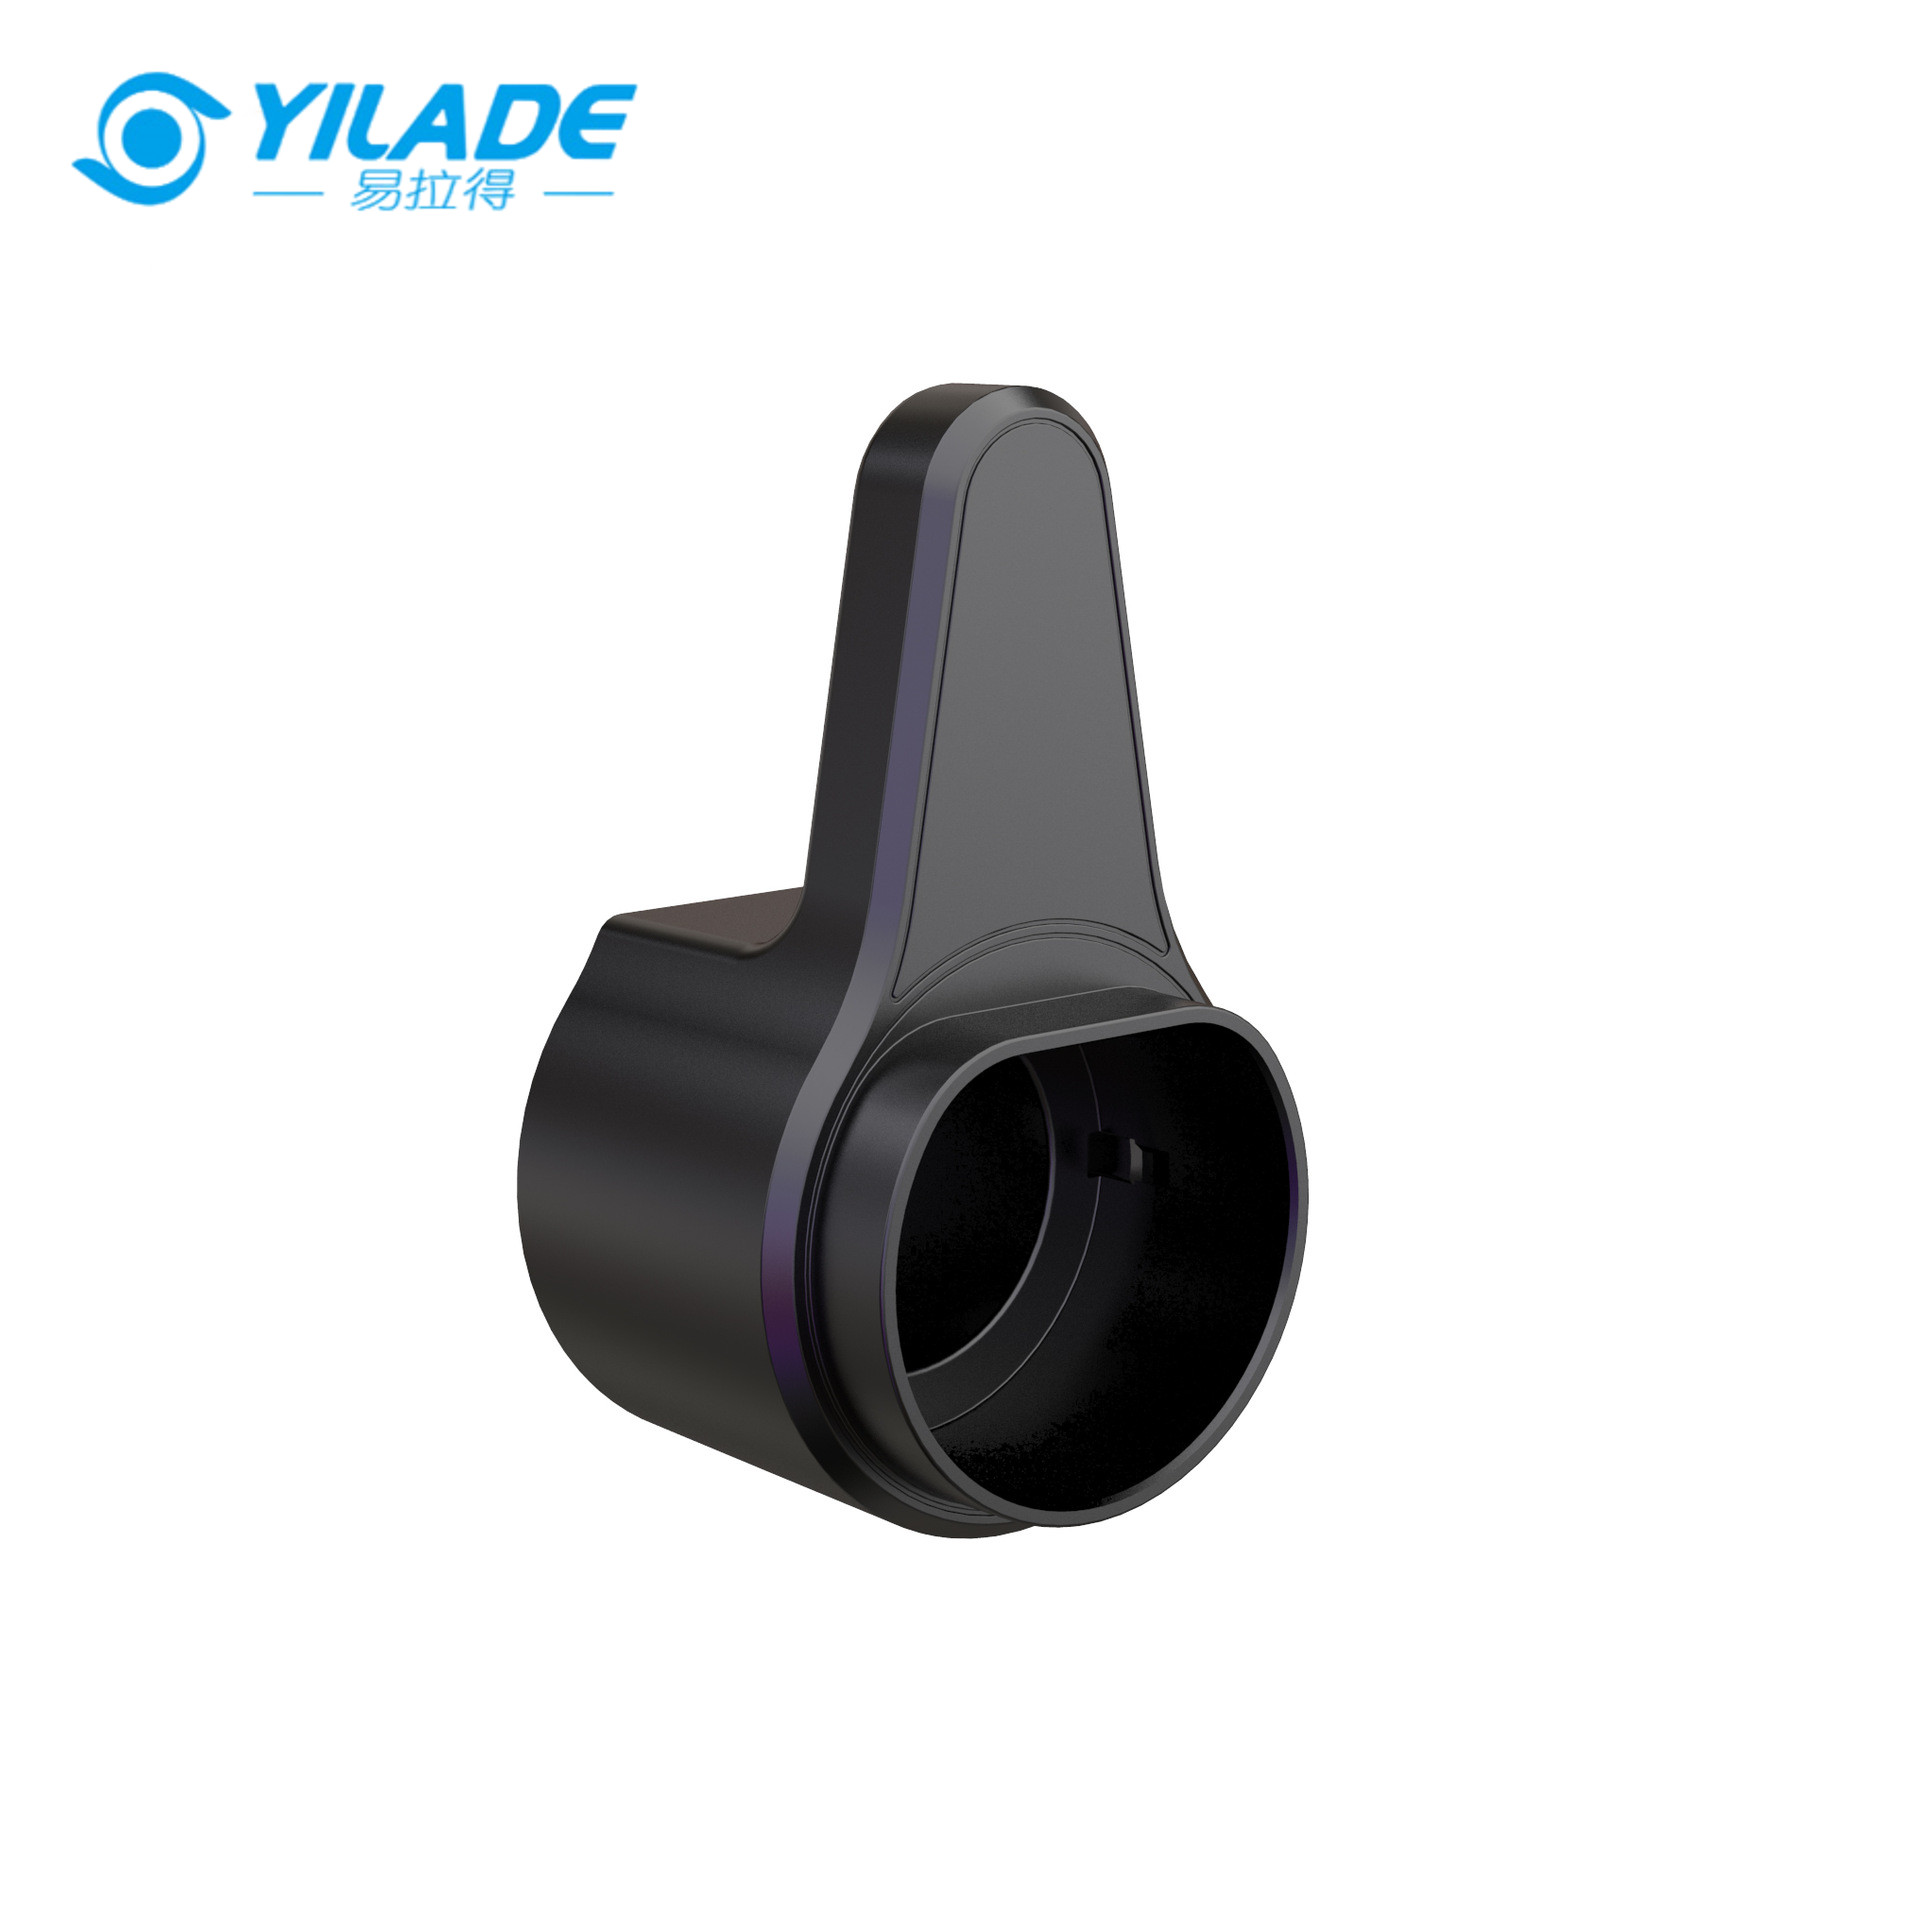 EV Charger Plug Holder for Electric Vehicle Type 2/Type 1 Charging Cable Plug Stand Extra Protection Wallmounted Wallbox